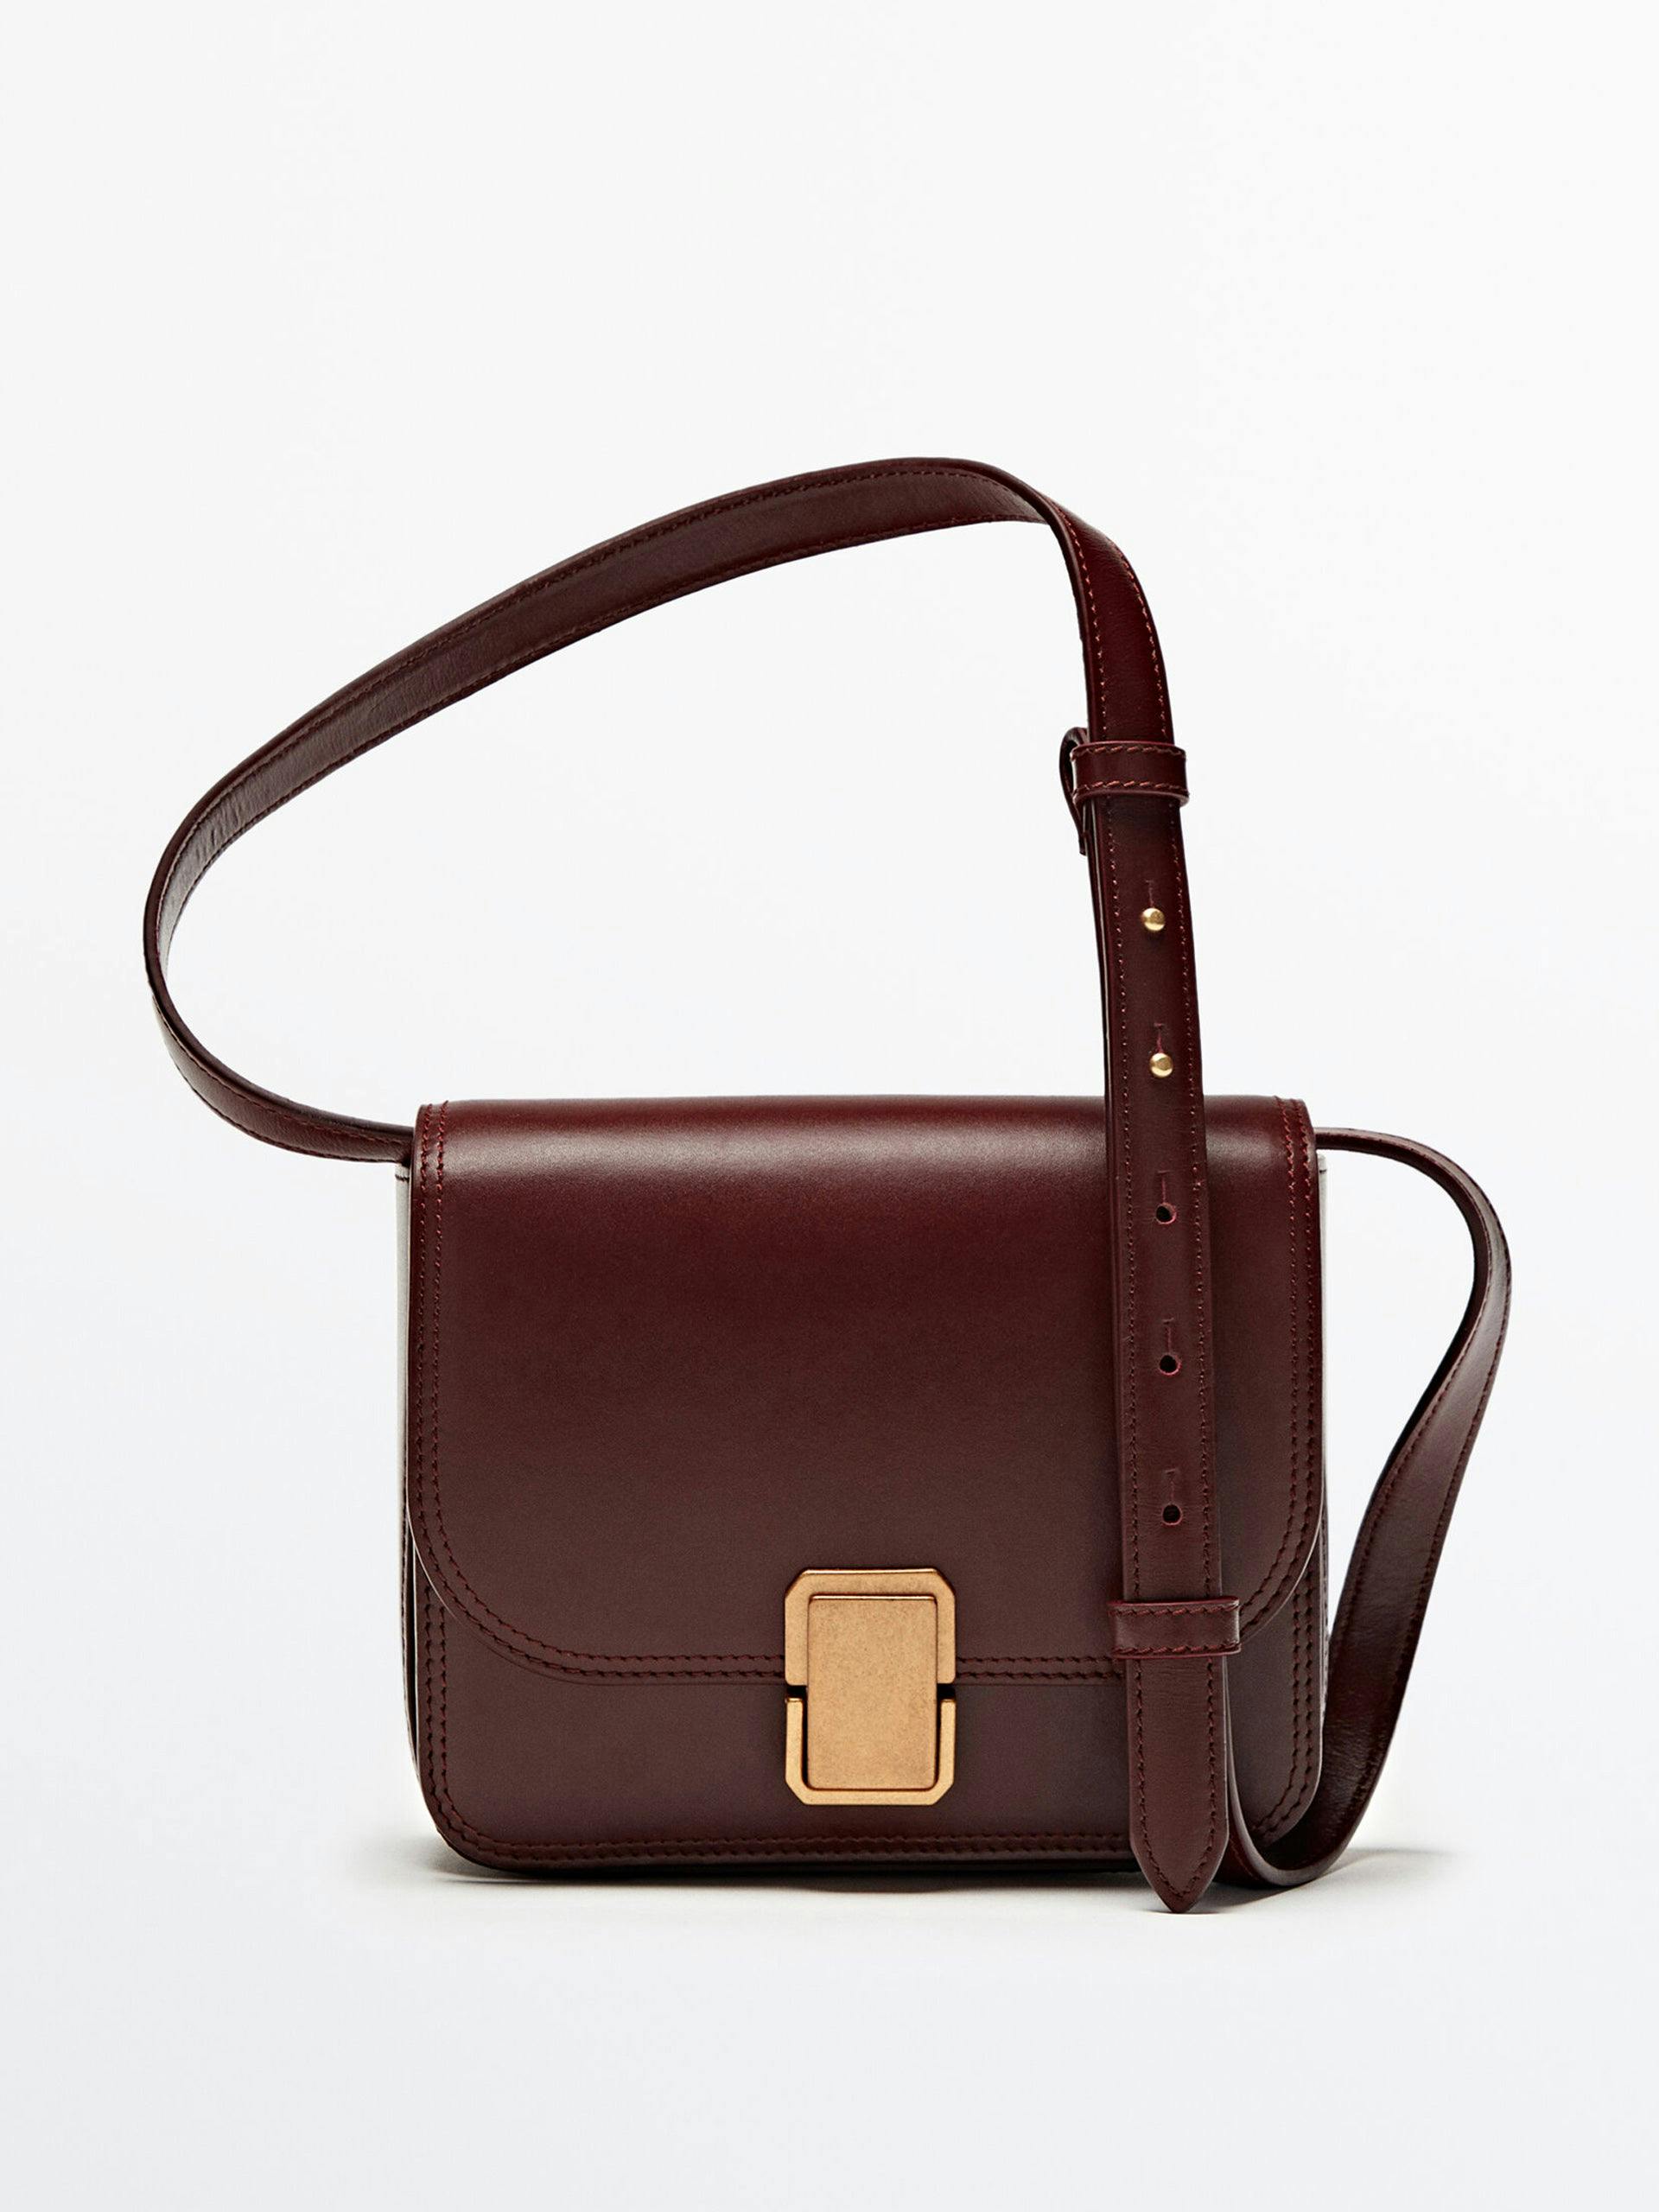 Leather crossbody bag with gold buckle finish